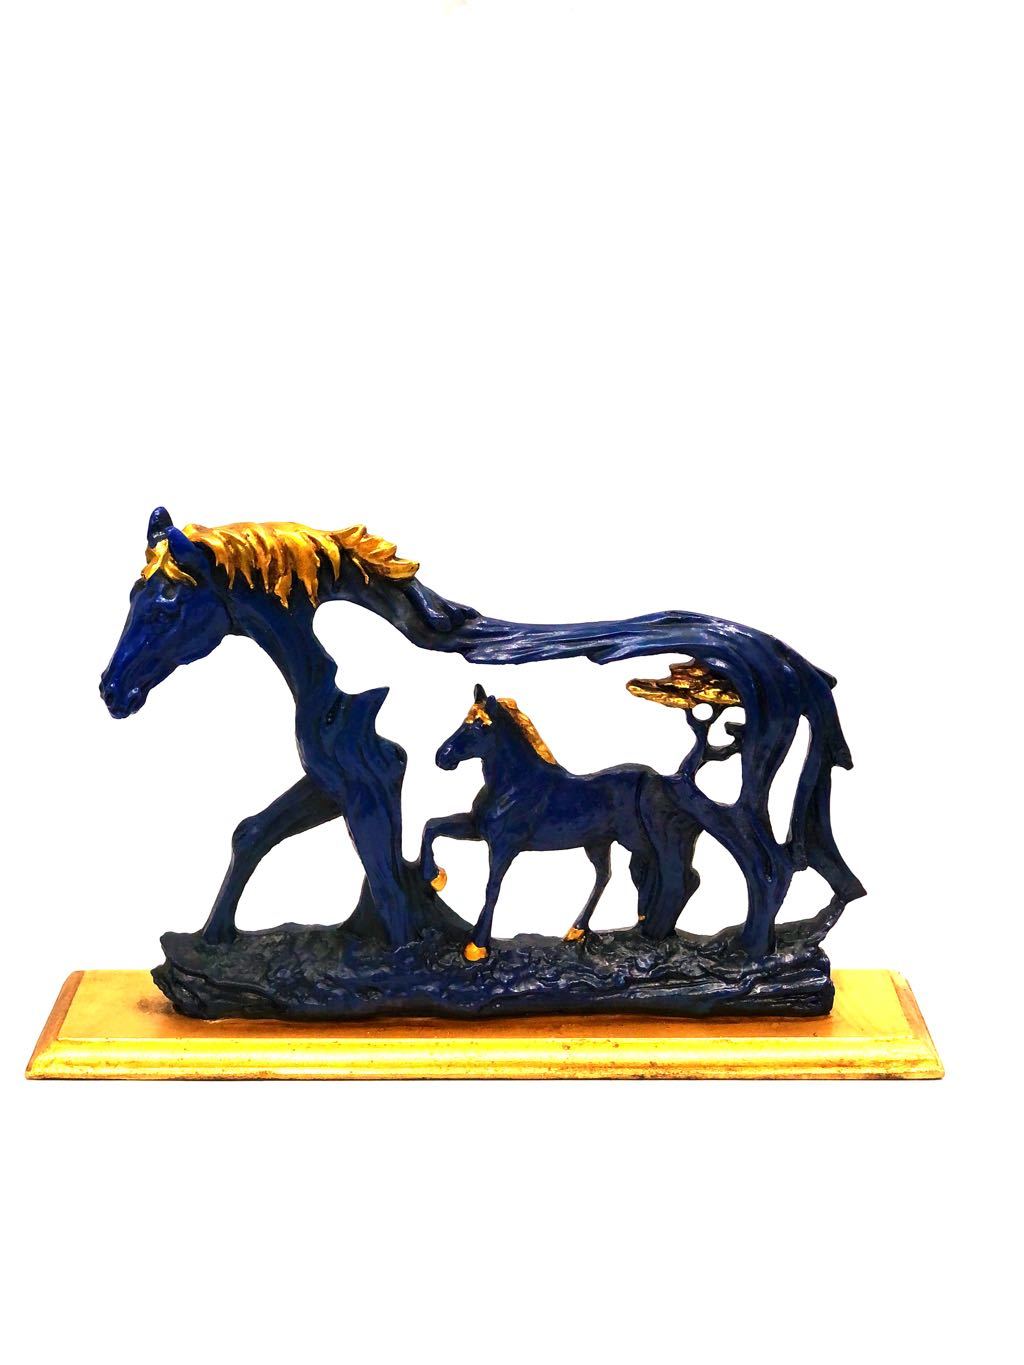 Unique Creation Of Baby Horse Inside Mother Horse Resin Artefacts By Tamrapatra